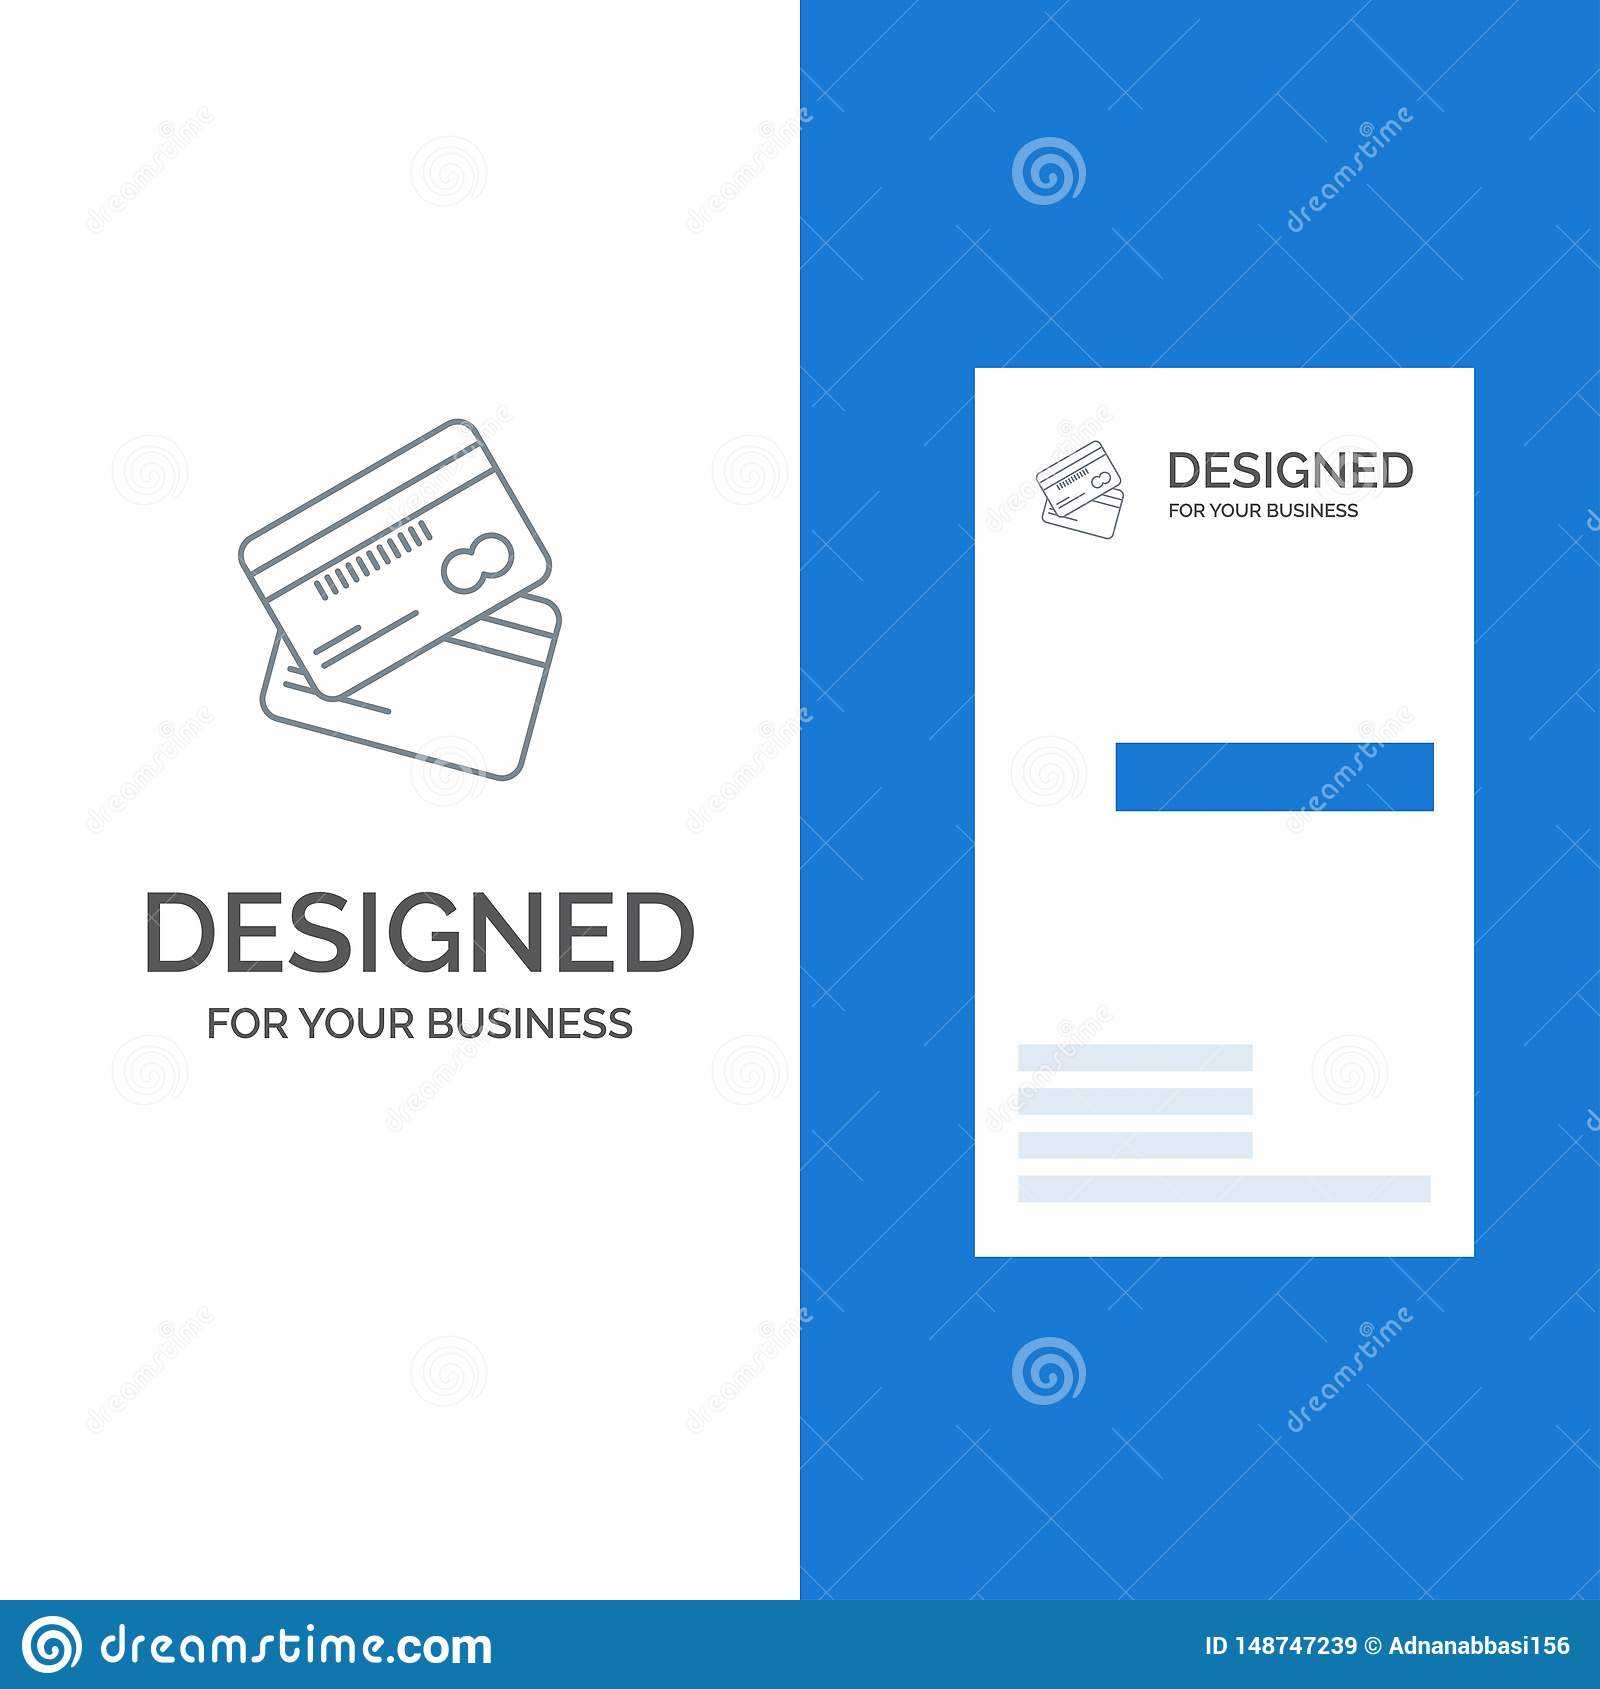 Credit Card, Business, Cards, Credit Card, Finance, Money With Credit Card Templates For Sale